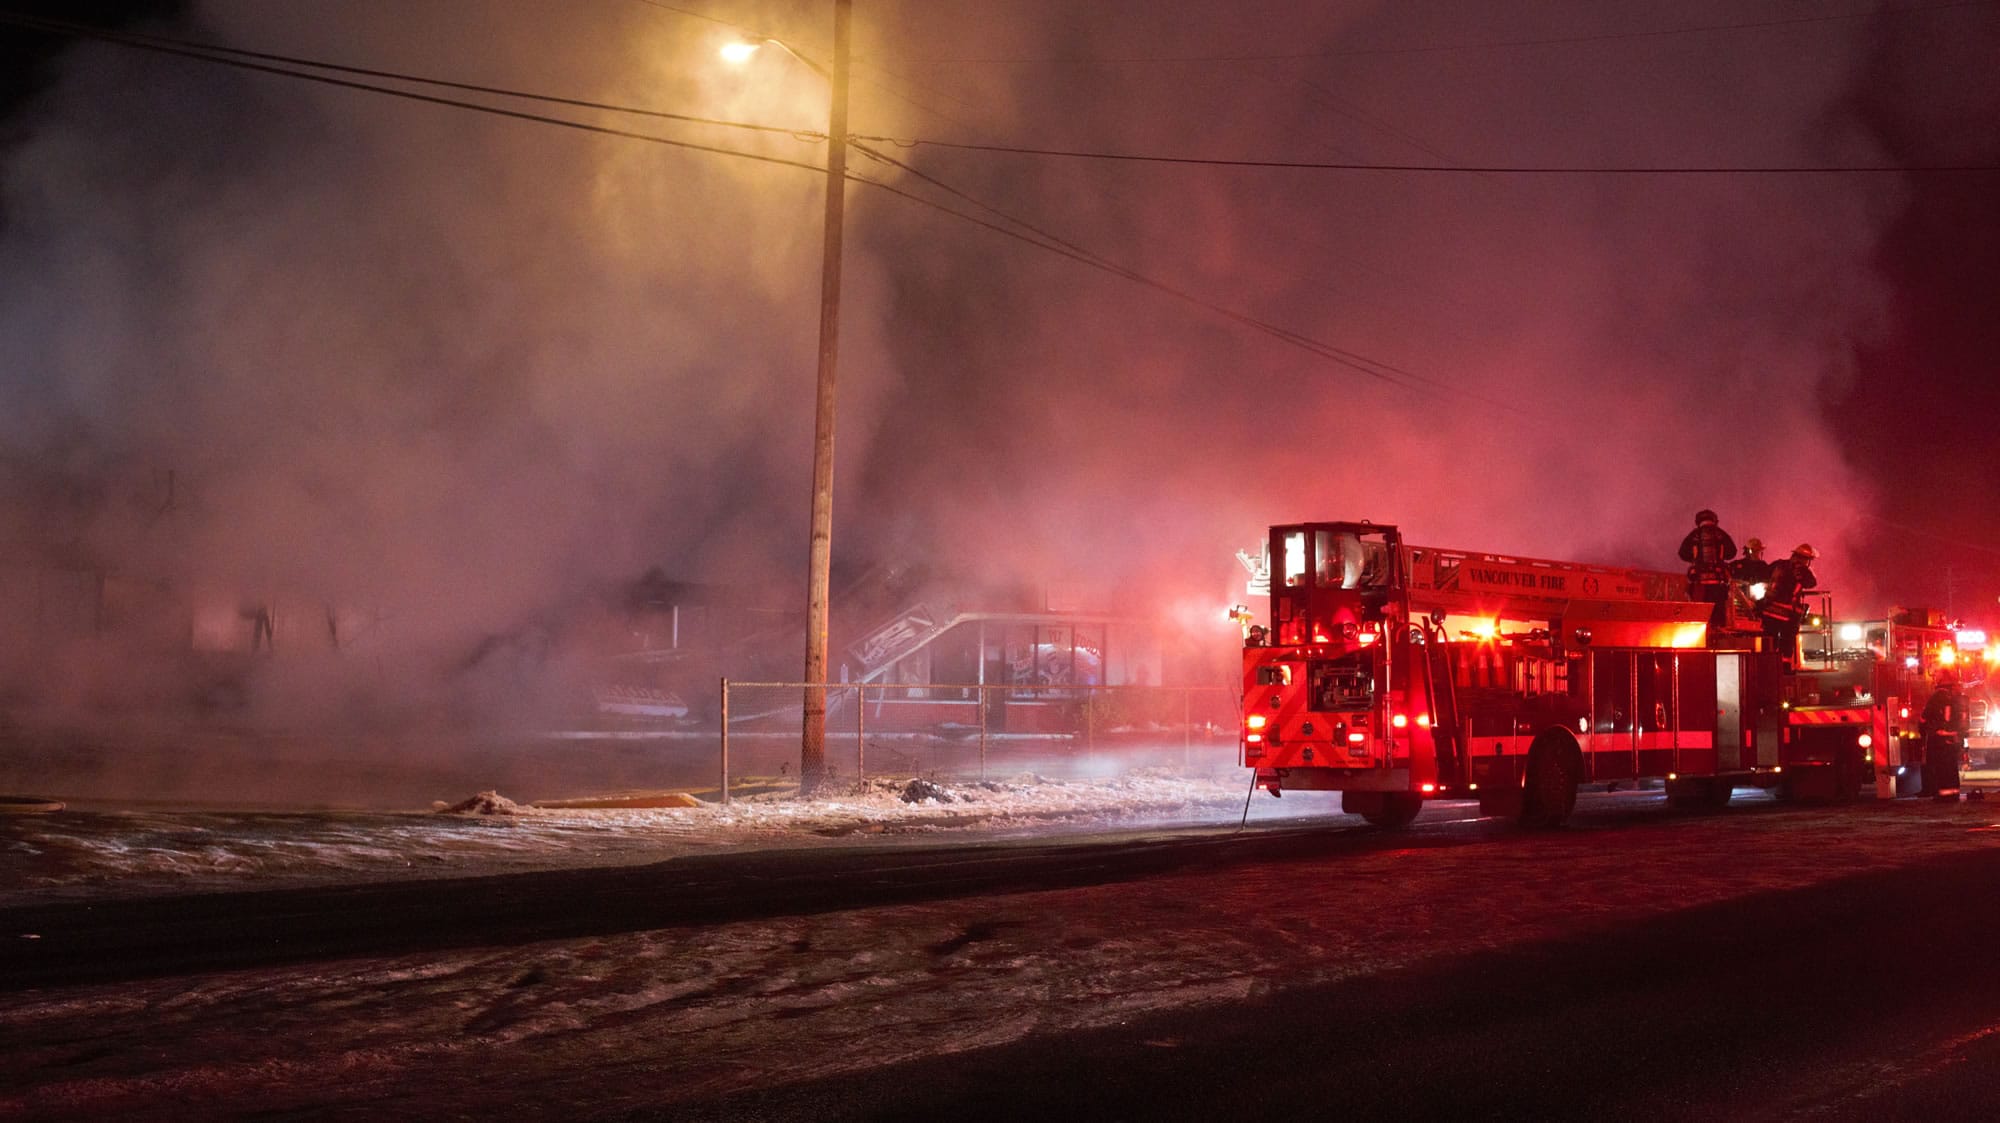 About 5:30 a.m. Sunday, a fire broke out at 13412 N.E. Fourth Plain Blvd. in Vancouver.